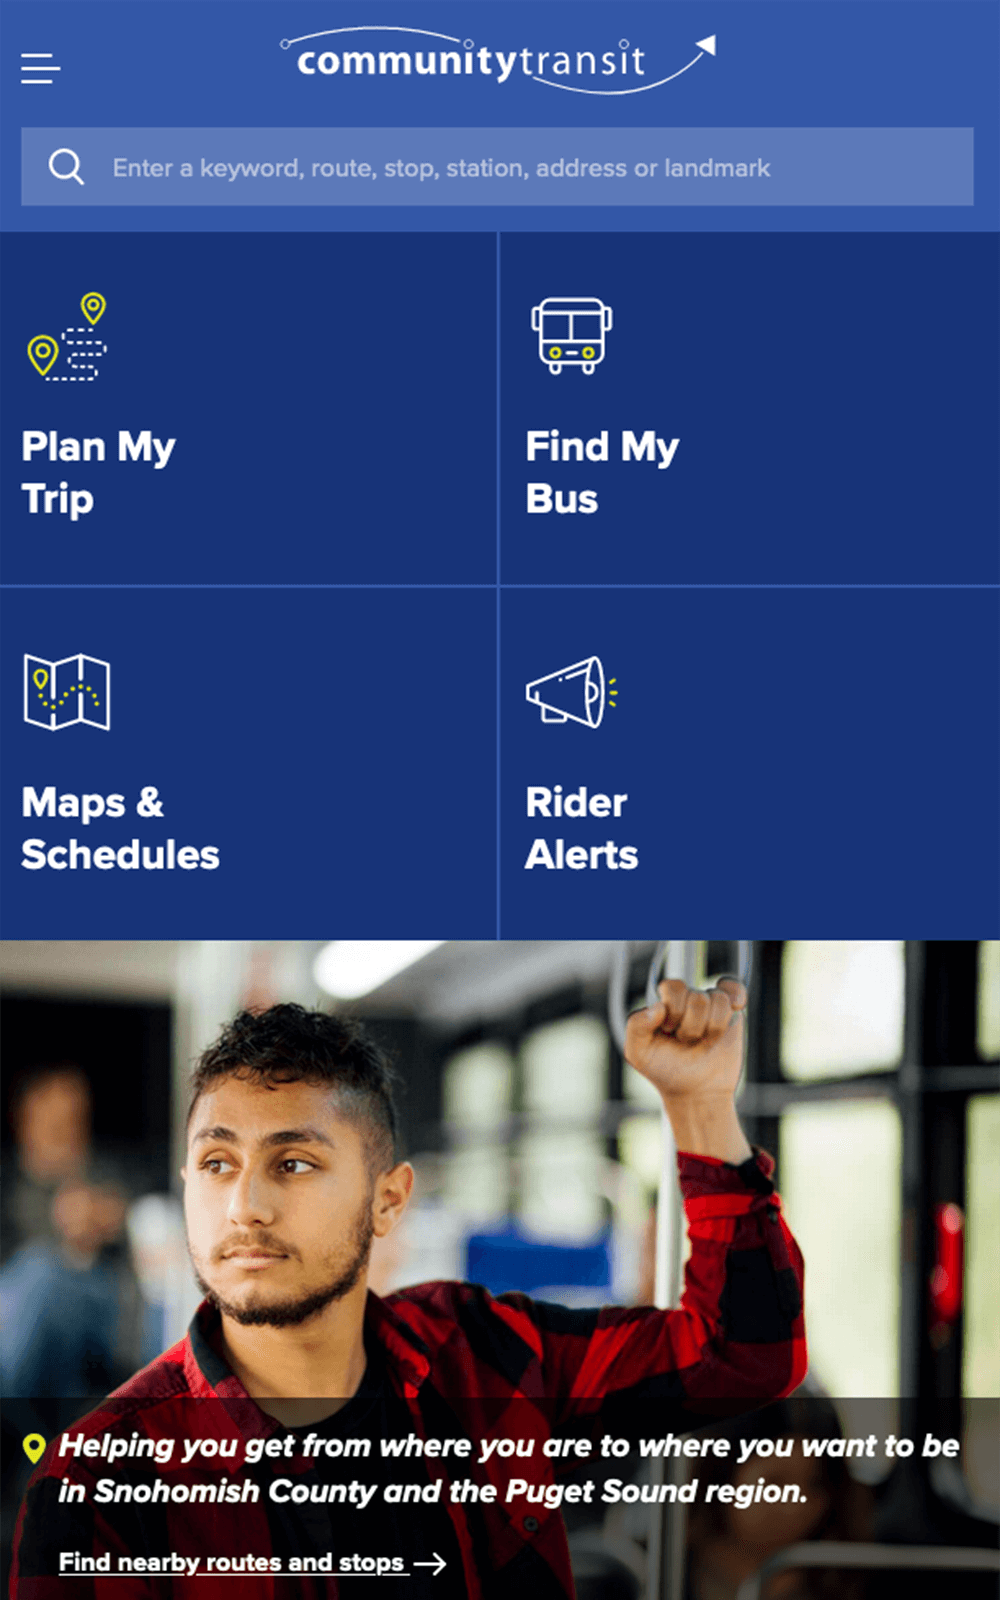 The new Community Transit home page